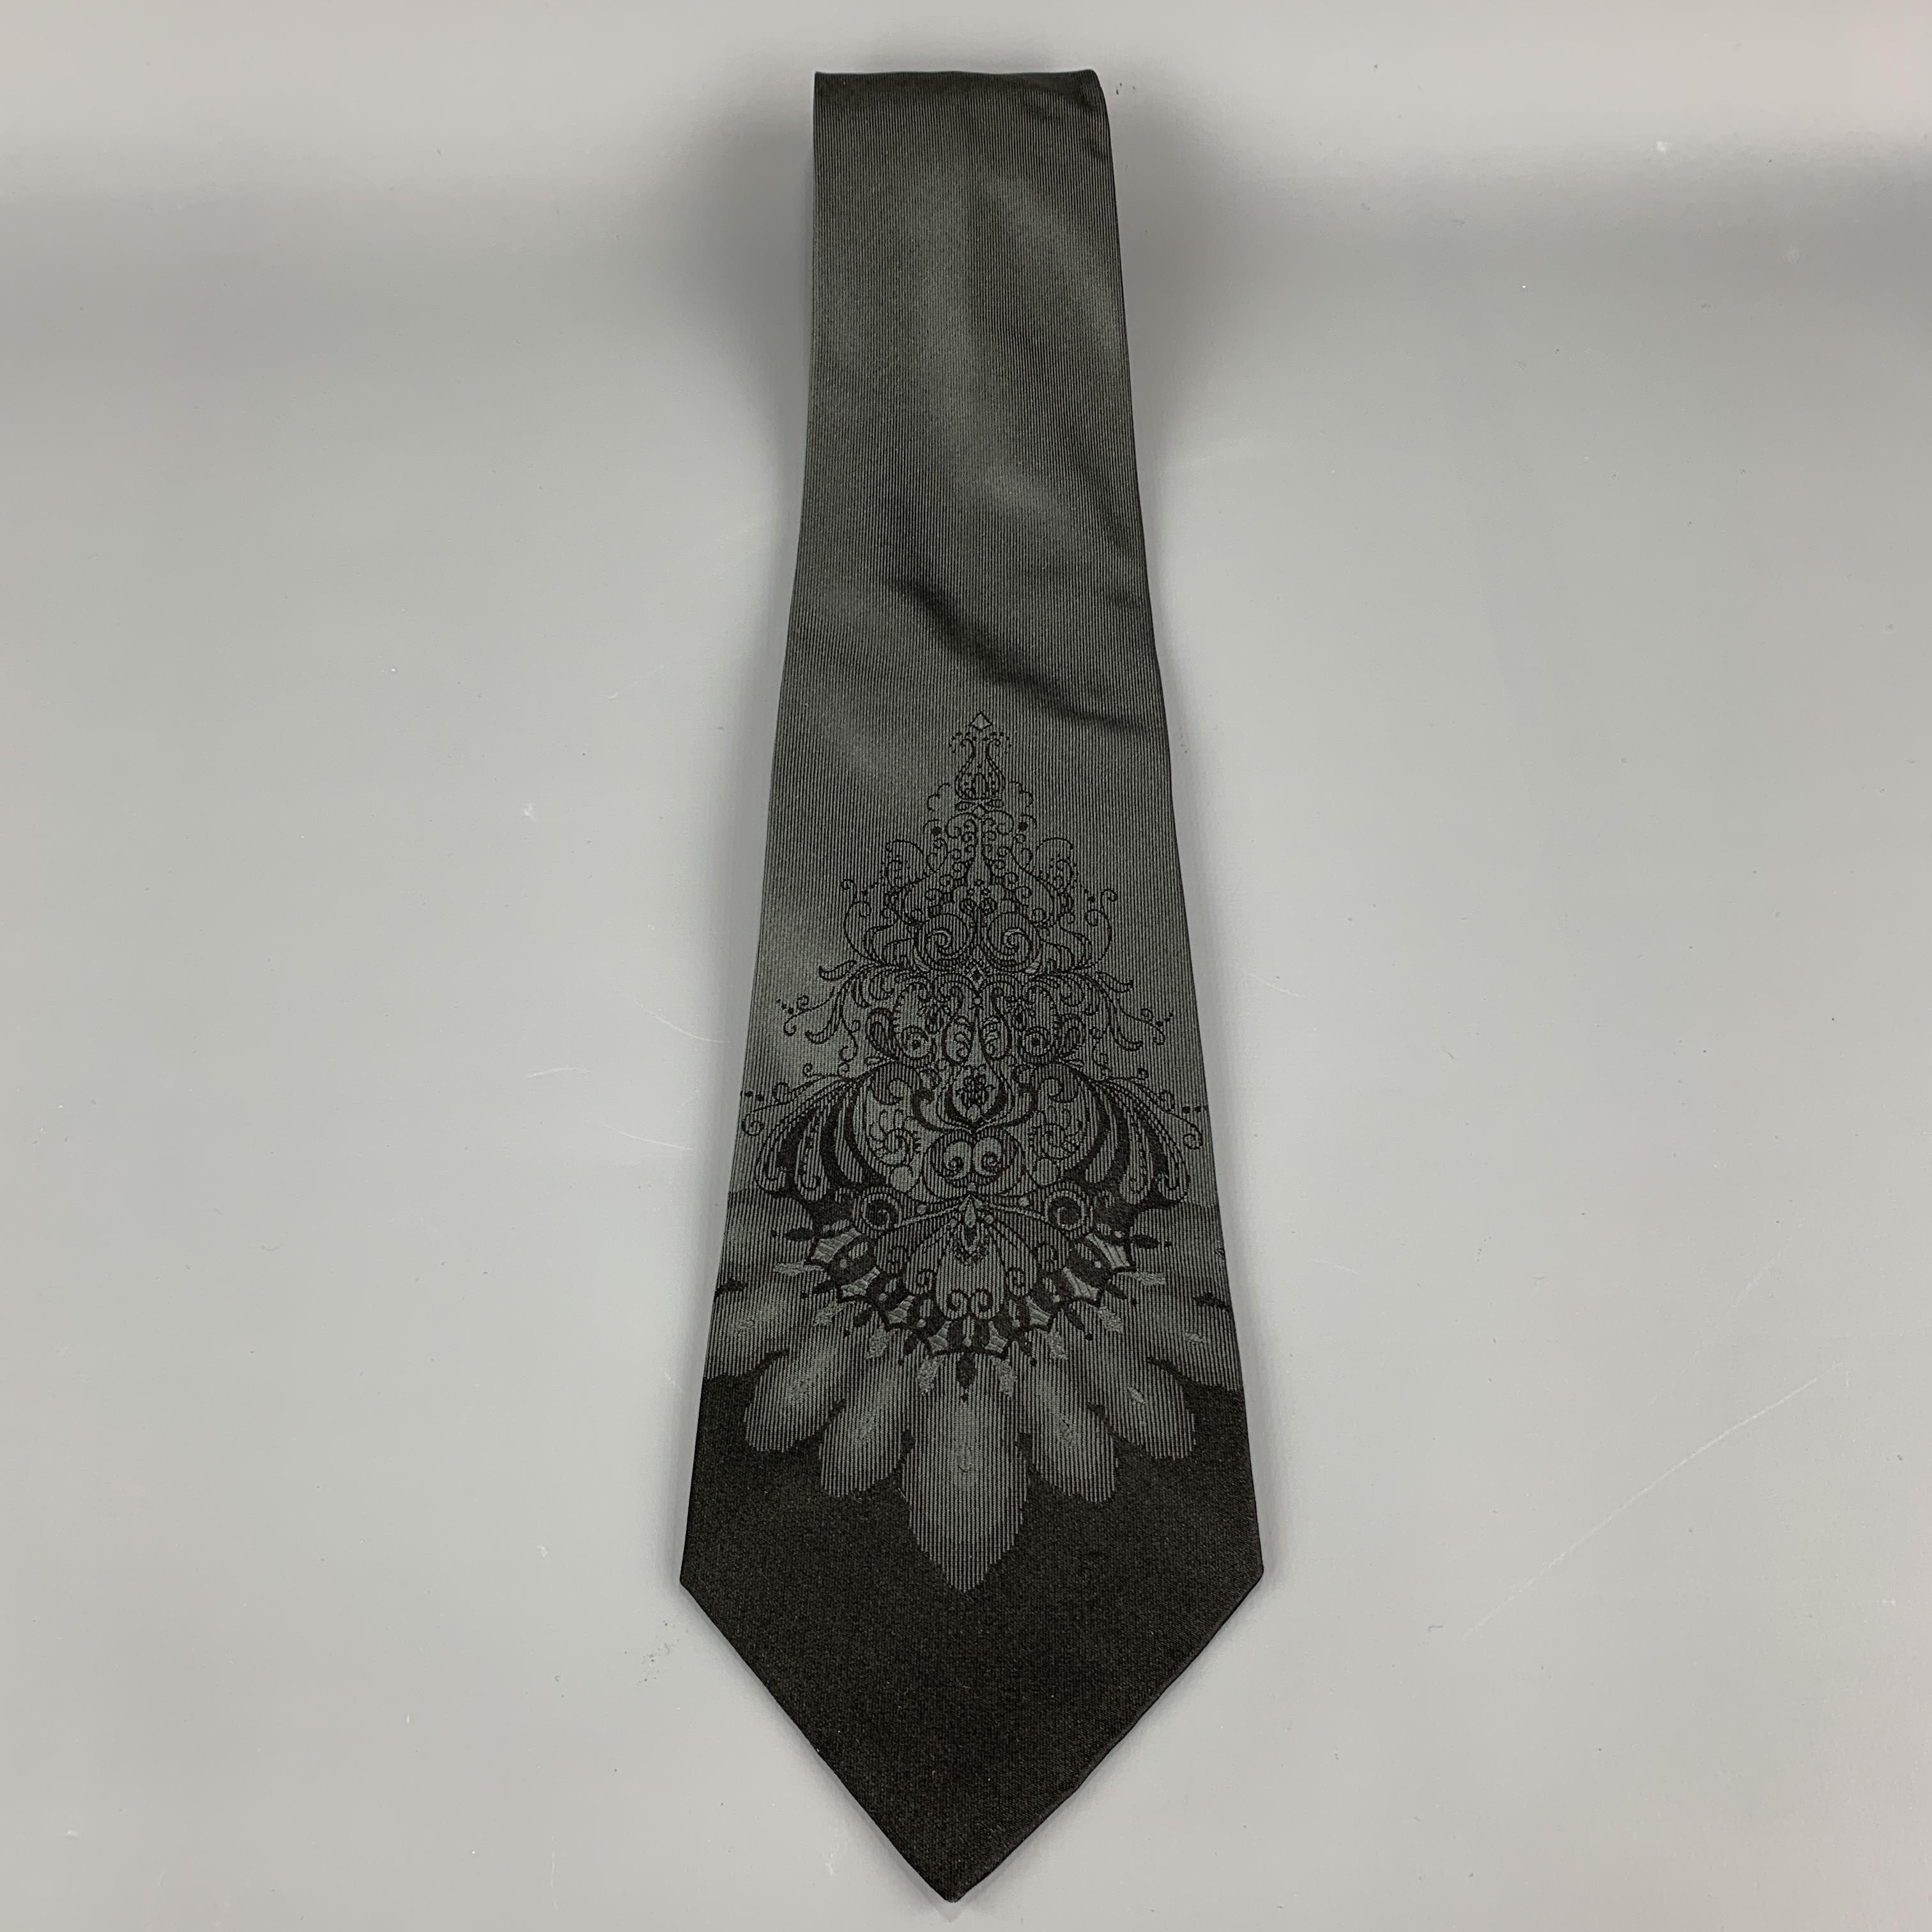 DOLCE & GABBANA necktie comes in charcoal silk twill with an abstract paisley print. Made in Italy.

Excellent Pre-Owned Condition.

Width: 3.75 in.